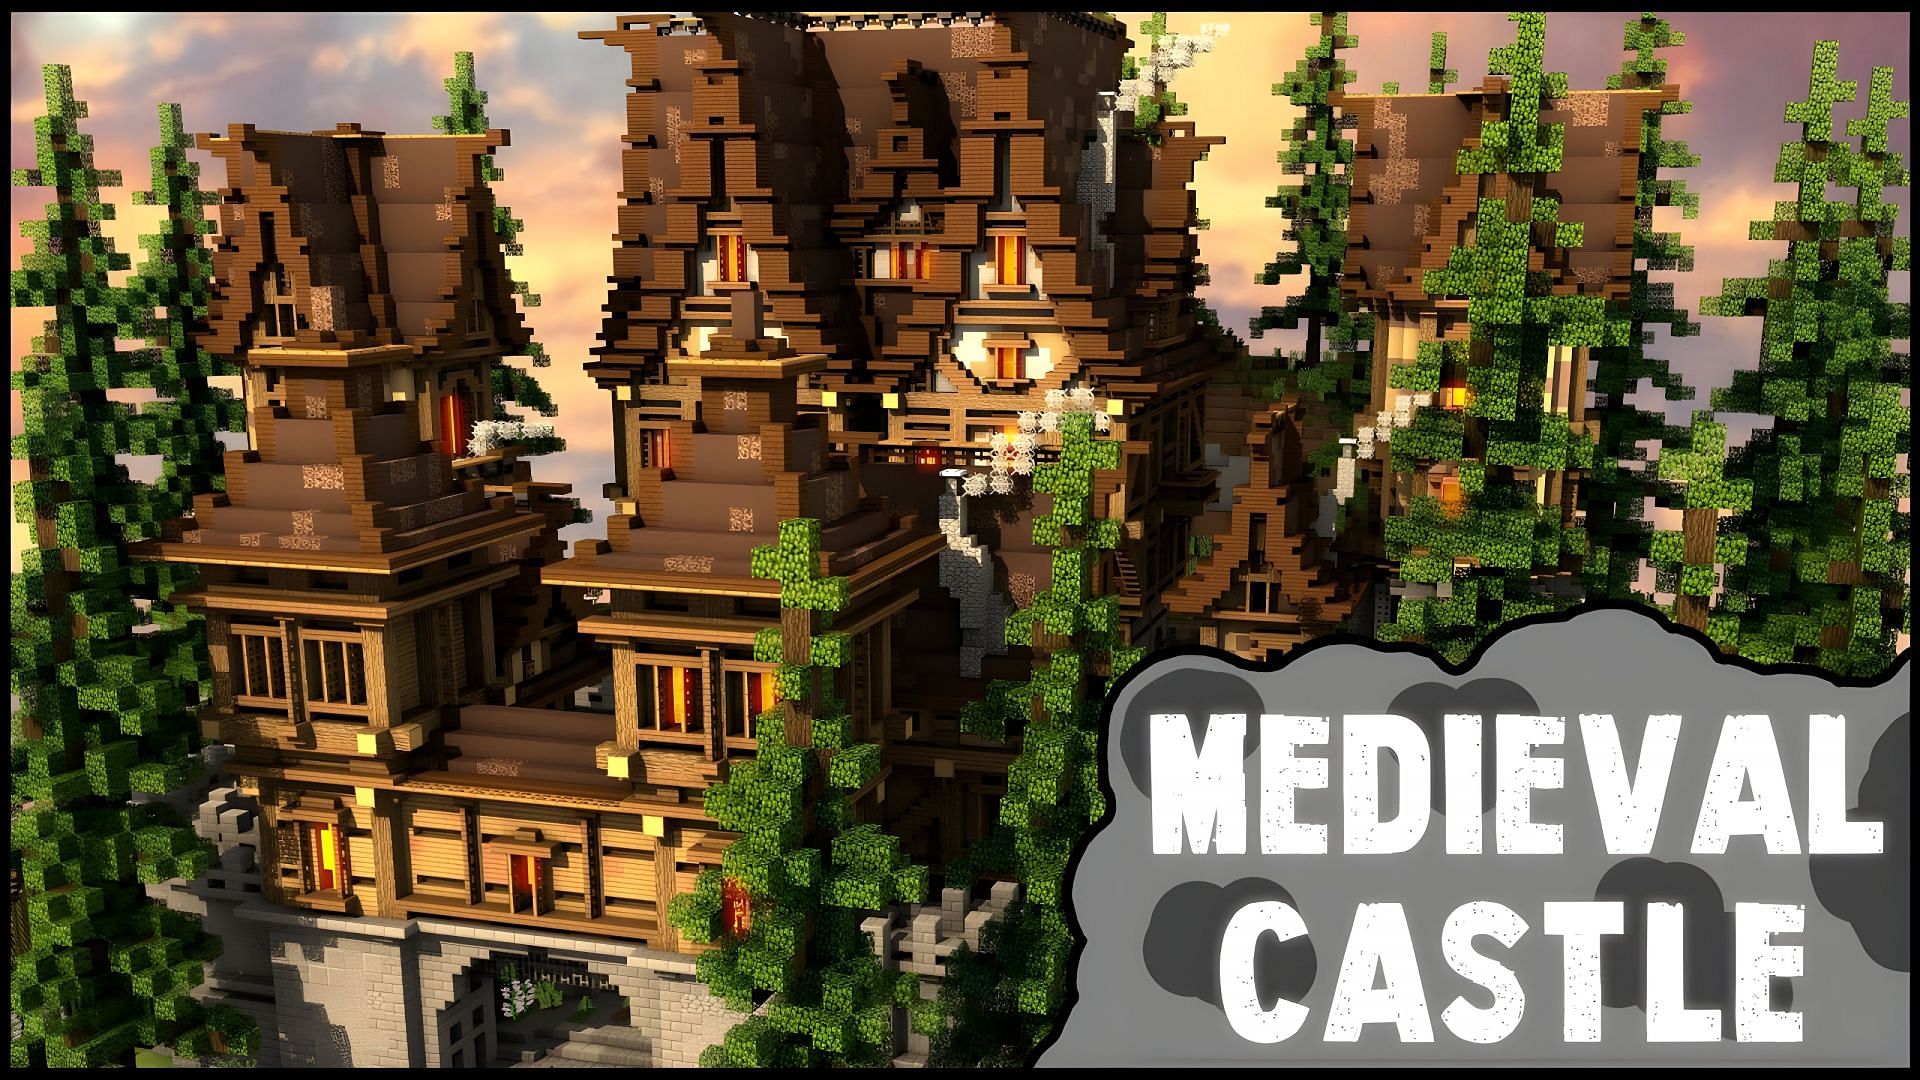 Medieval Castles in Minecraft can be magnificent (Image via Mojang Studios || YouTube/DiddiHD)